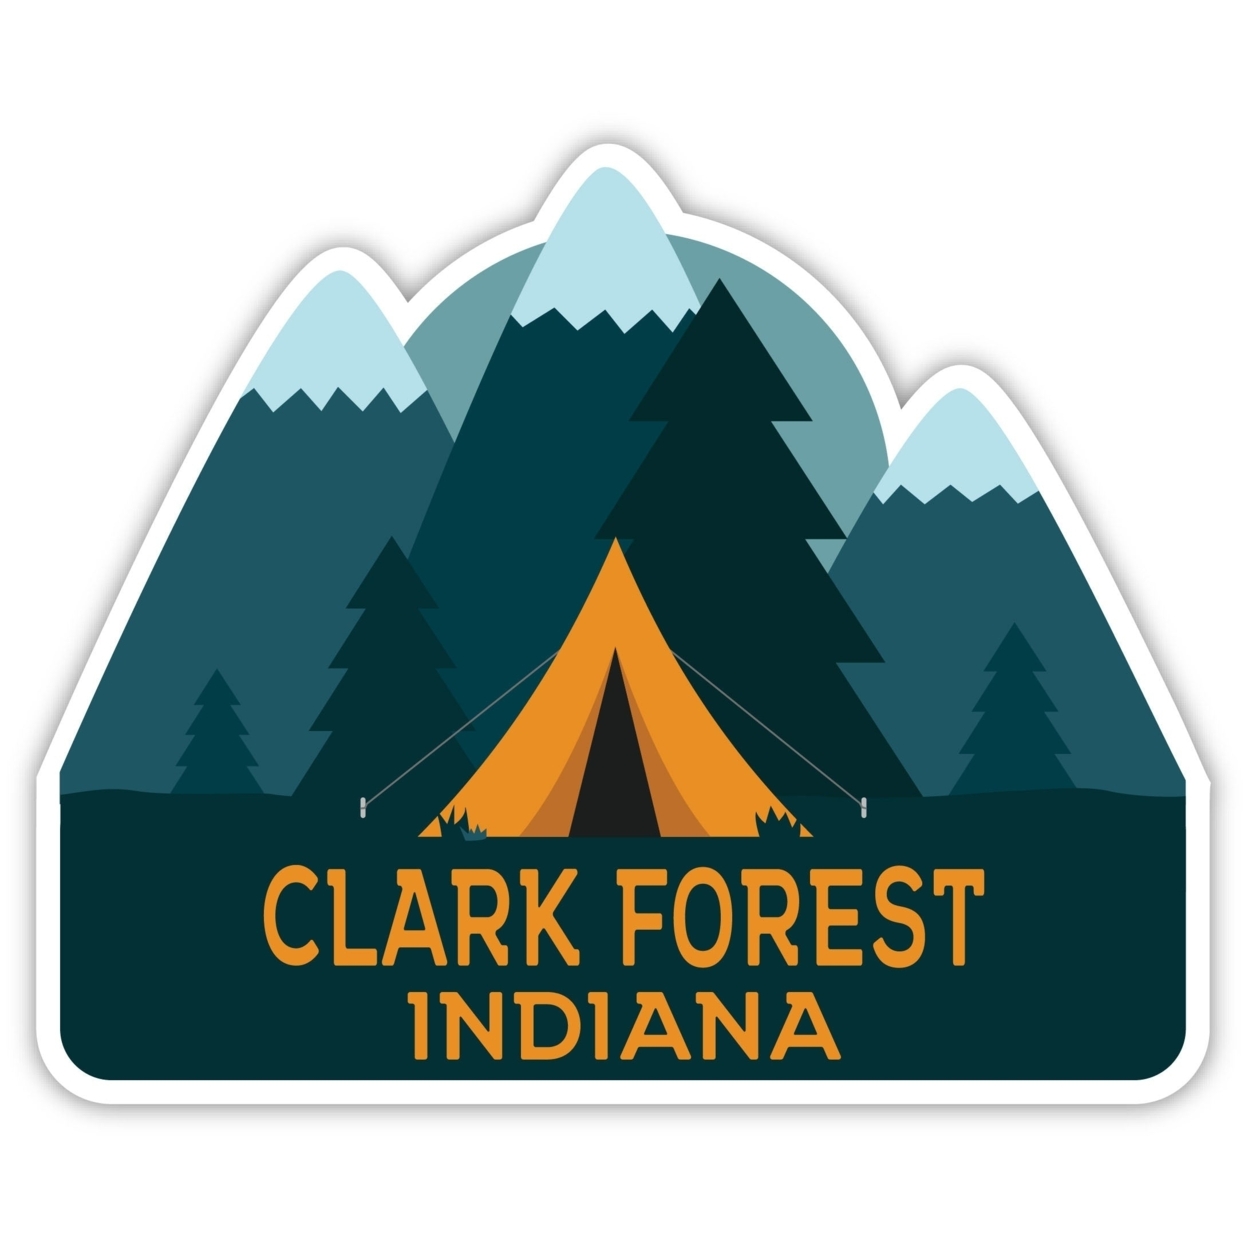 Clark Forest Indiana Souvenir Decorative Stickers (Choose Theme And Size) - 4-Pack, 6-Inch, Tent